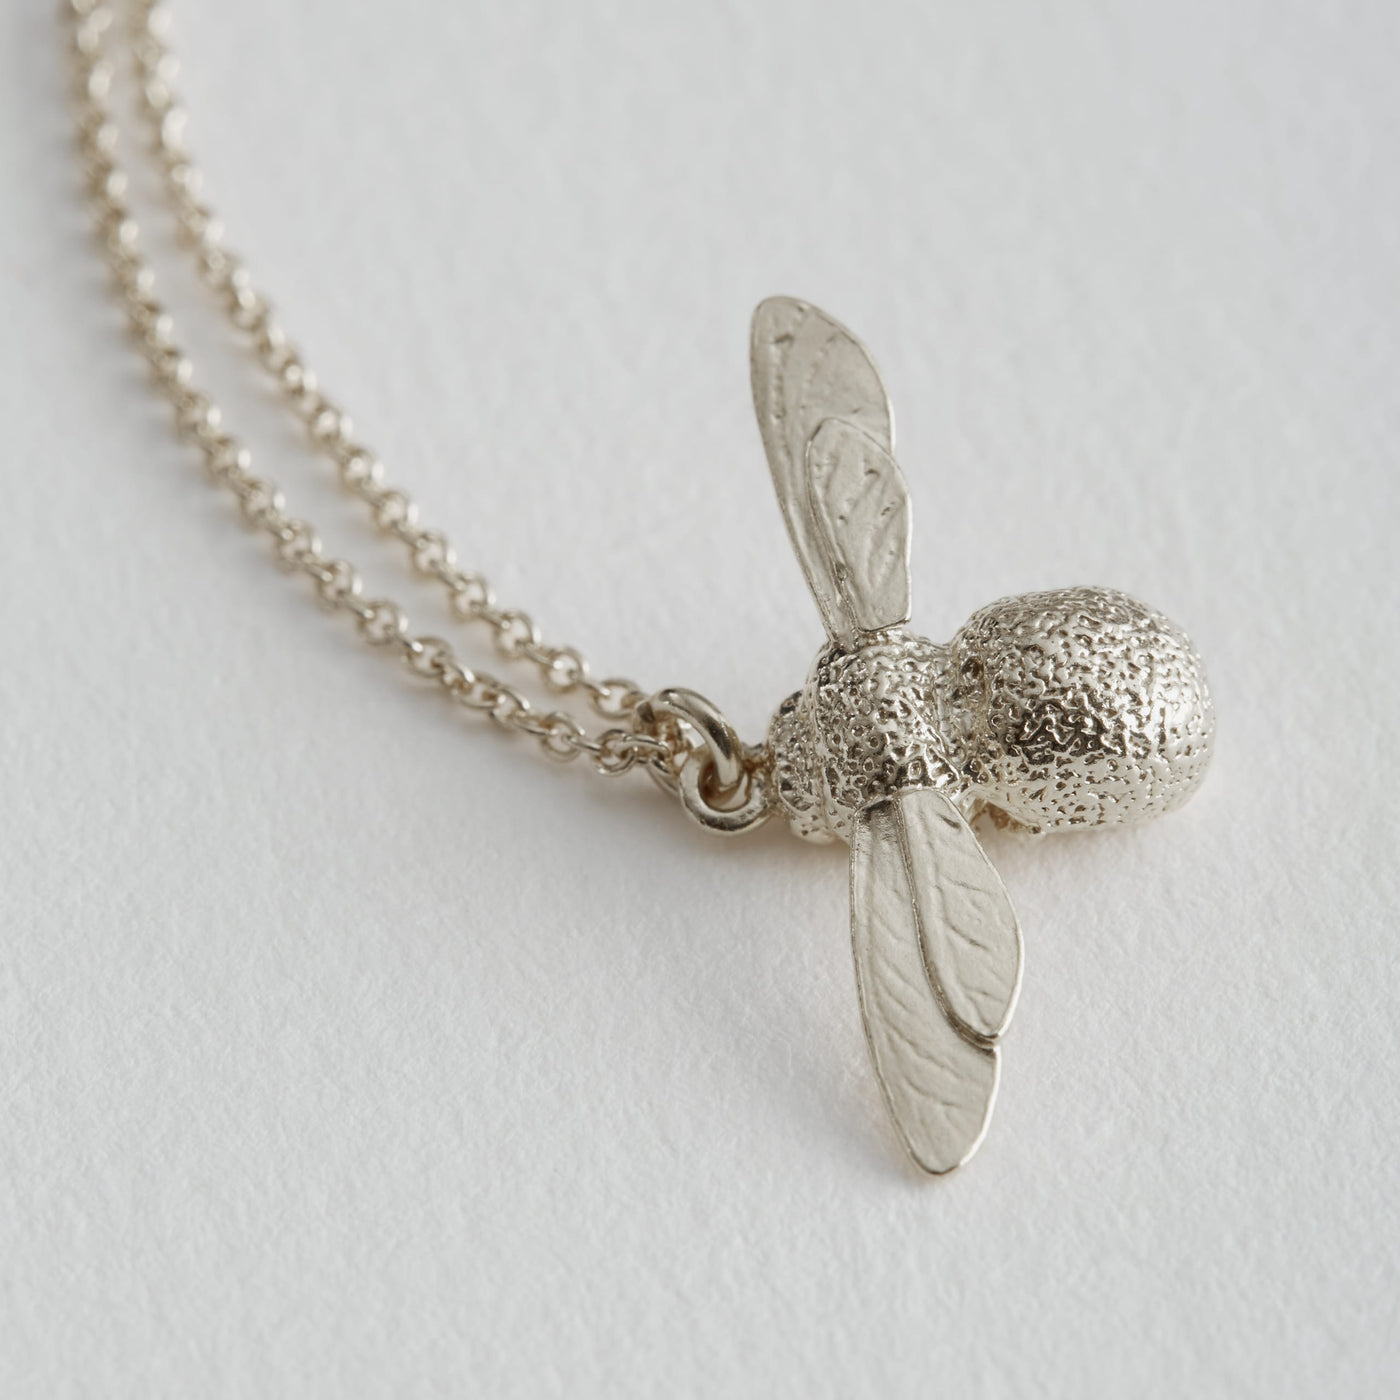 A silver model of a small Bee with outstretched wings with a silver trace chain lying on a white background, made by Alex Monroe and stocked by Kirsty Taylor Jewellery in Northumberland.